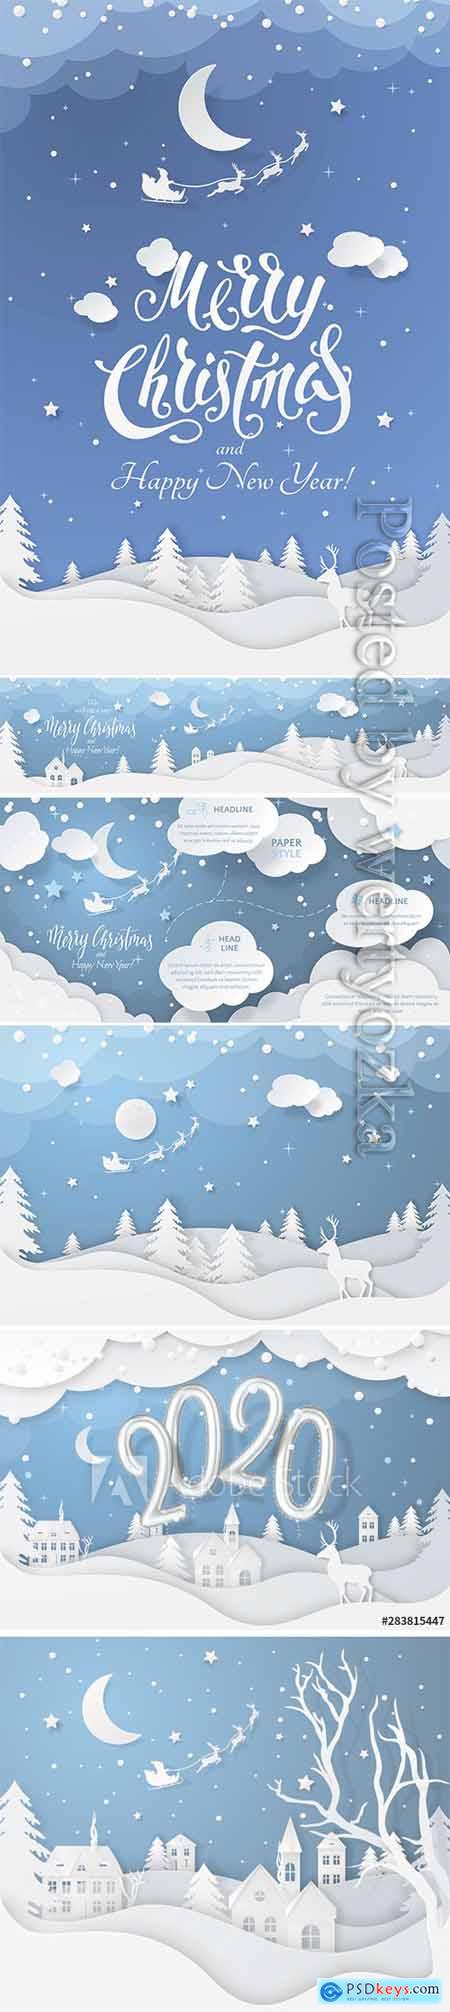 Vector winter night scene with fir trees, houses, moon, deer and realistic 2020 numbers